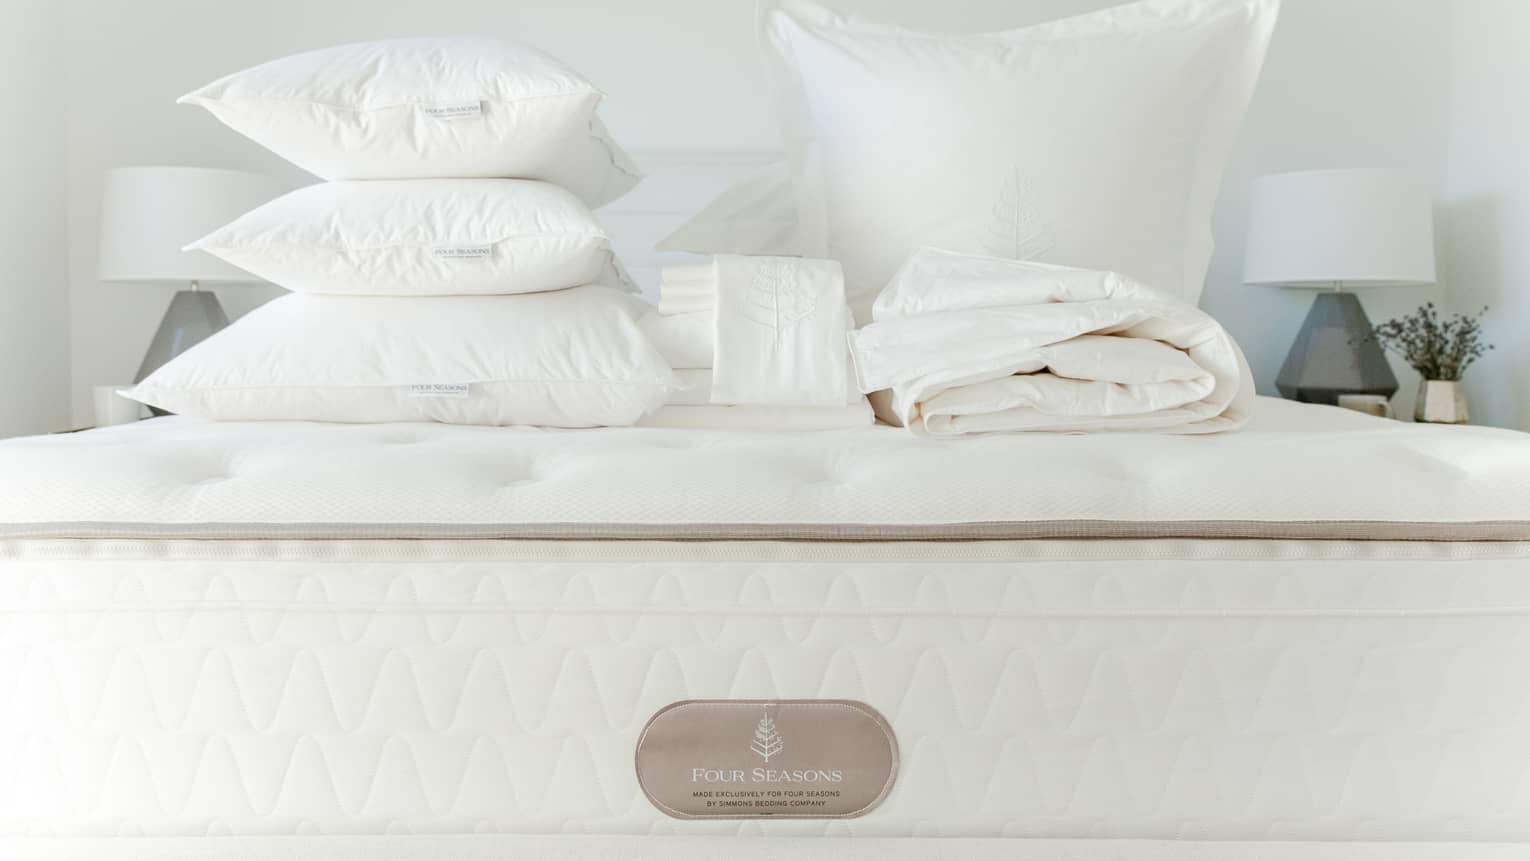 Queen bed stacked with folded white linens and feather pillows